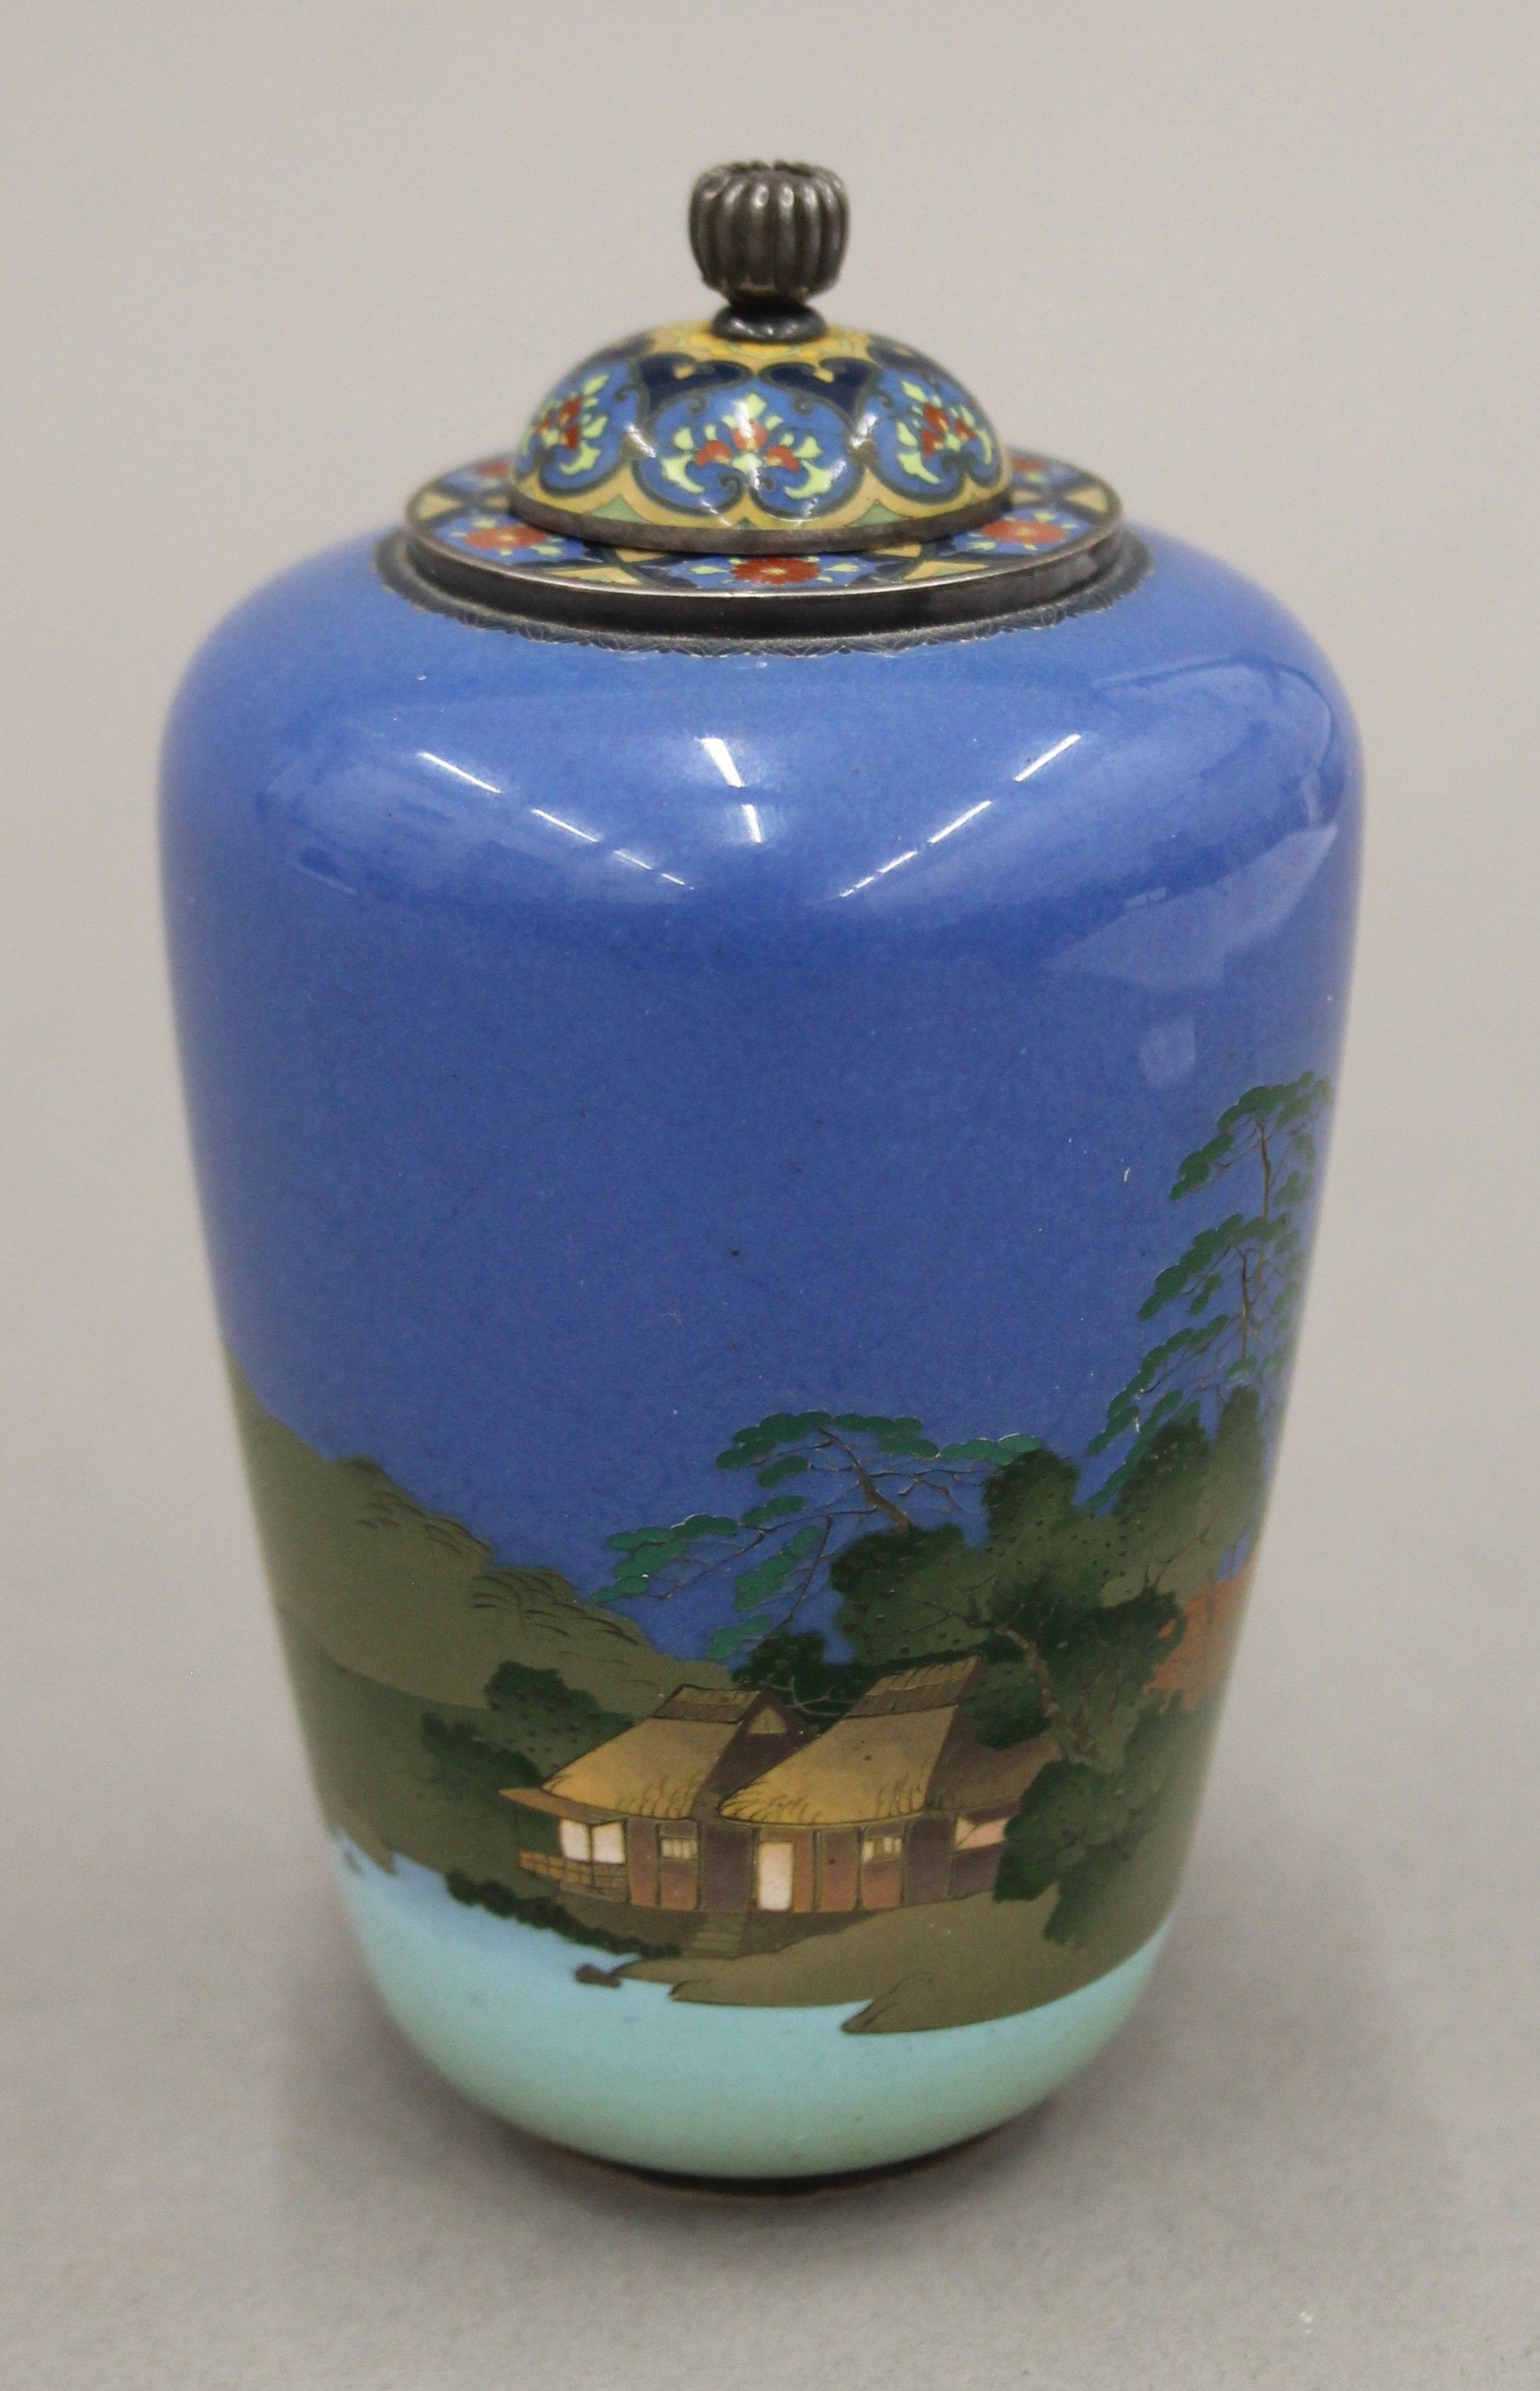 An early 20th century Japanese silver and cloisonne enamel lidded vase decorated with shoreline